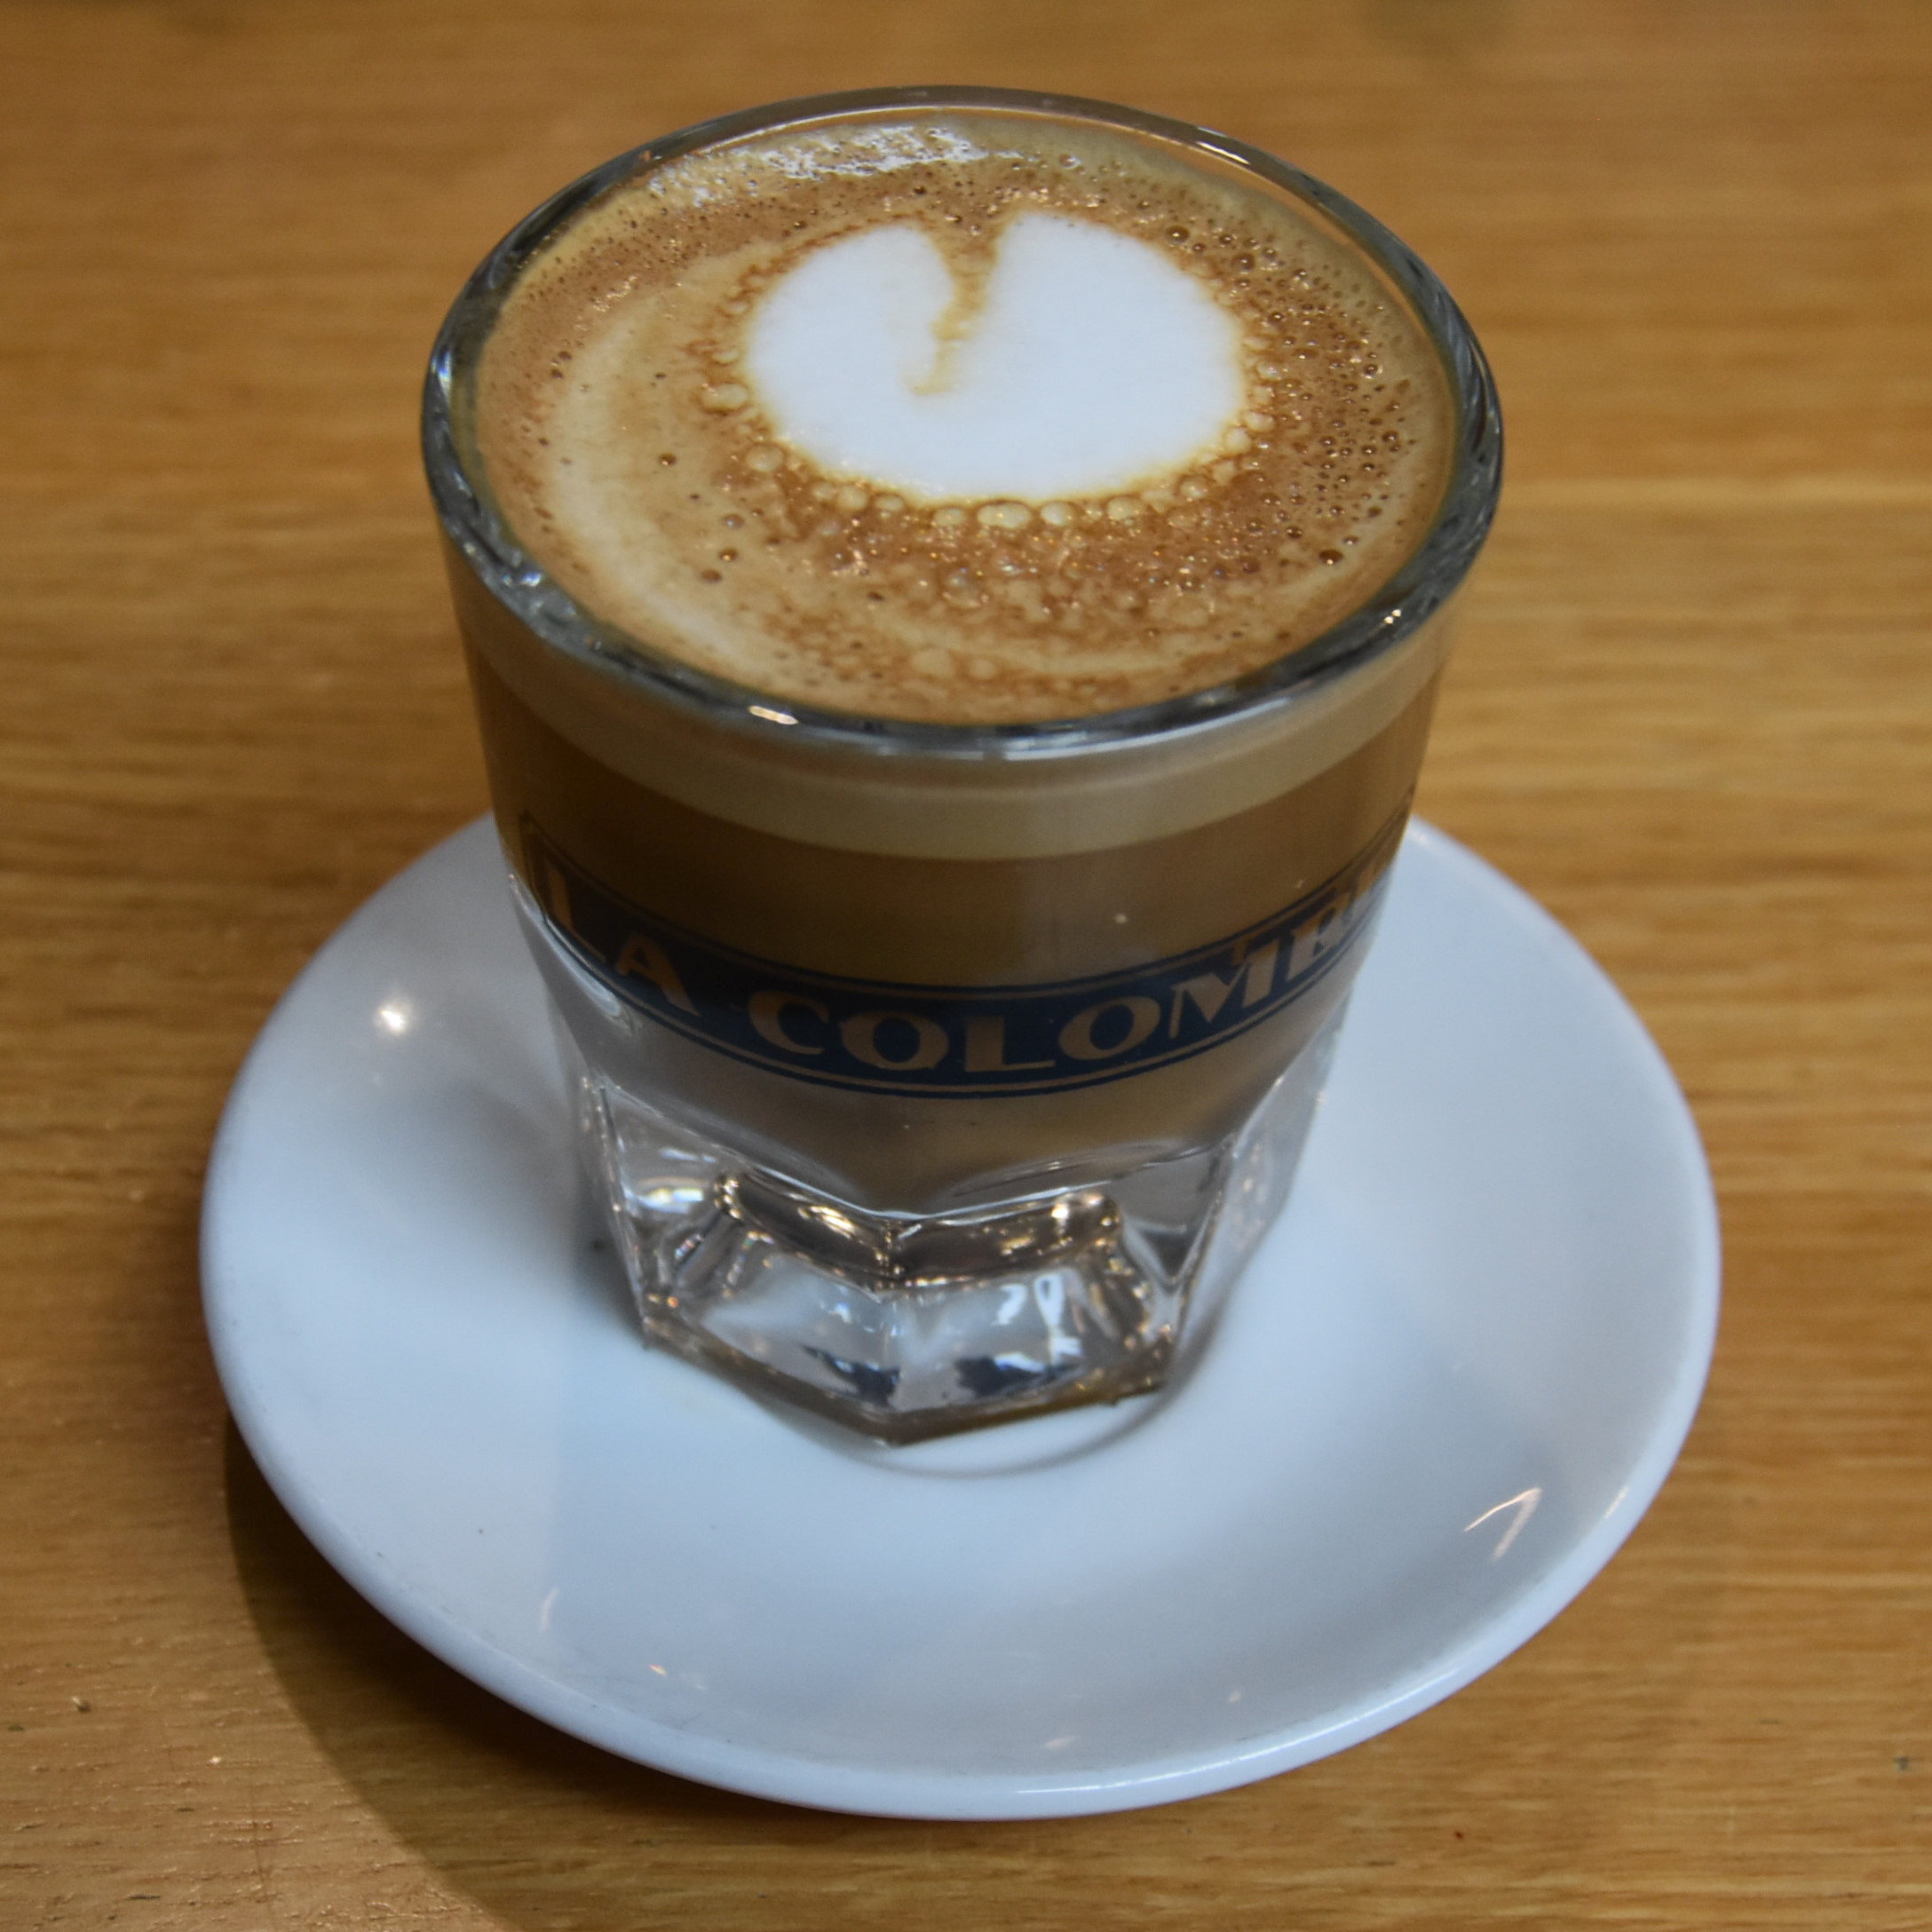 A cortado, made with the Sun Peak, a Guatemalan single-origin, and served in a glass at La Colombe, South Station in Boston.